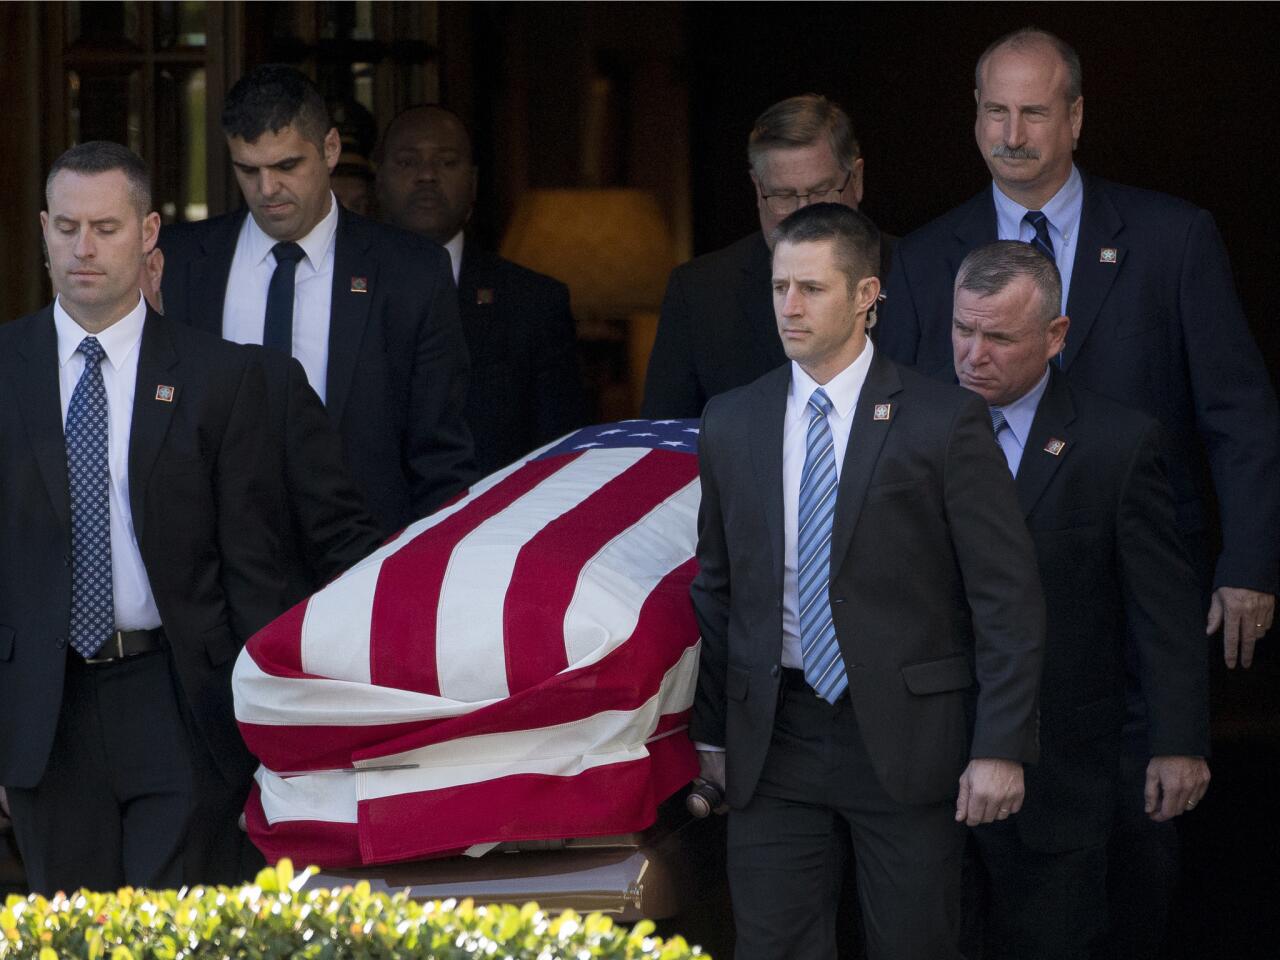 Members of the Secret Service place the casket in a hearse at George H. Lewis Funeral Home after a Bush family service in Houston